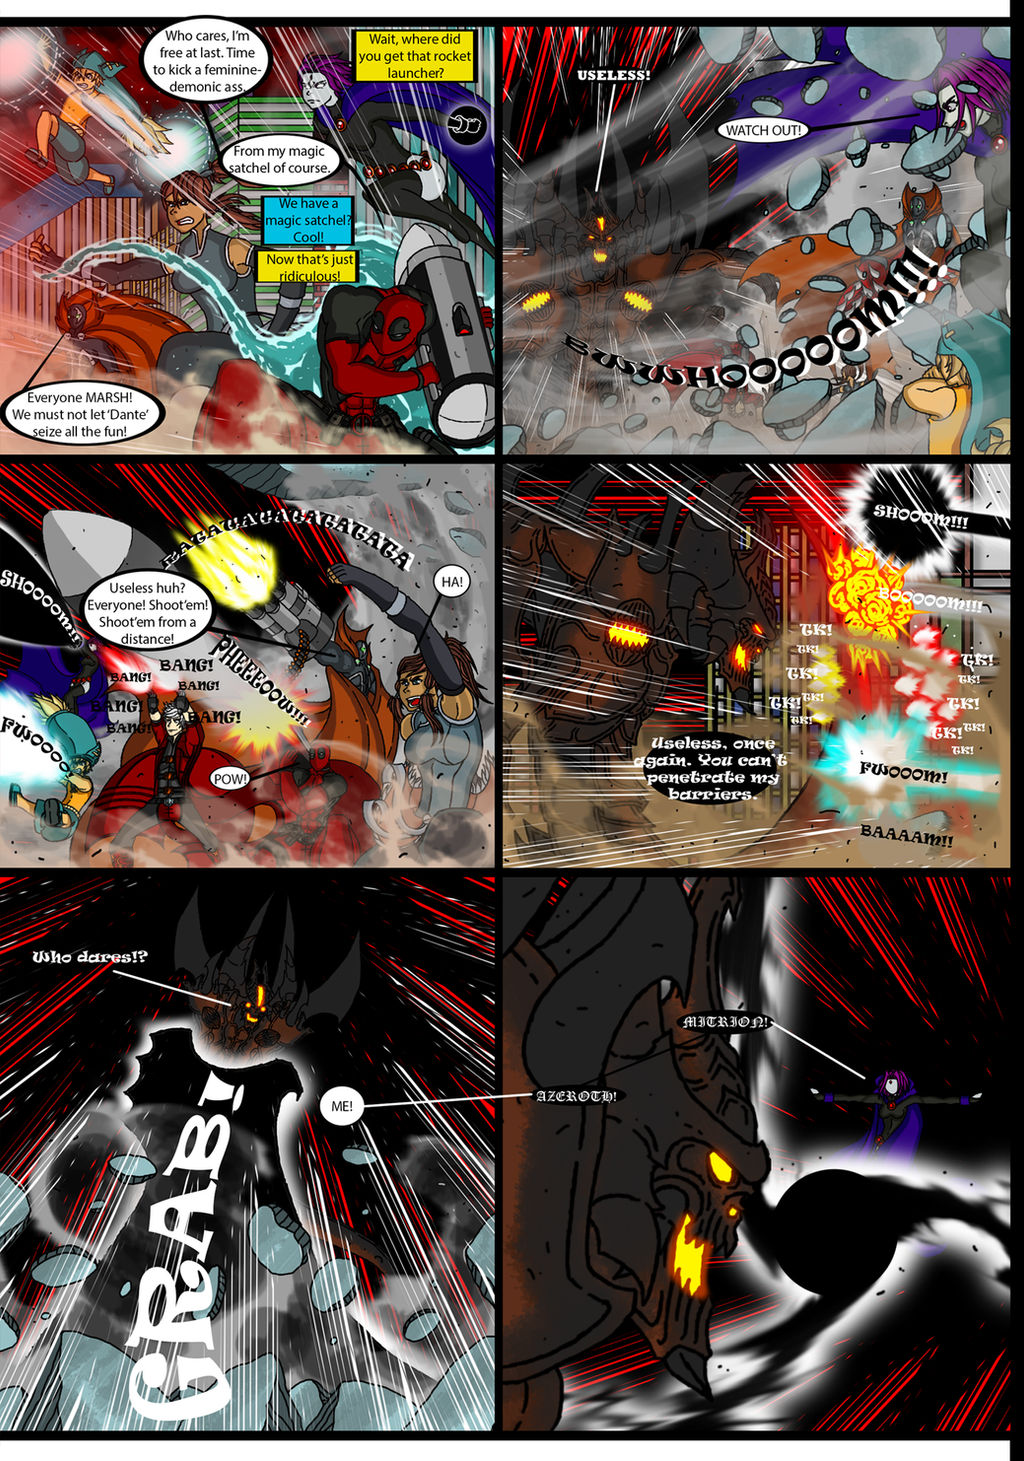 Crossover page 52: Some cliffhanger. by fassoul1993 on DeviantArt